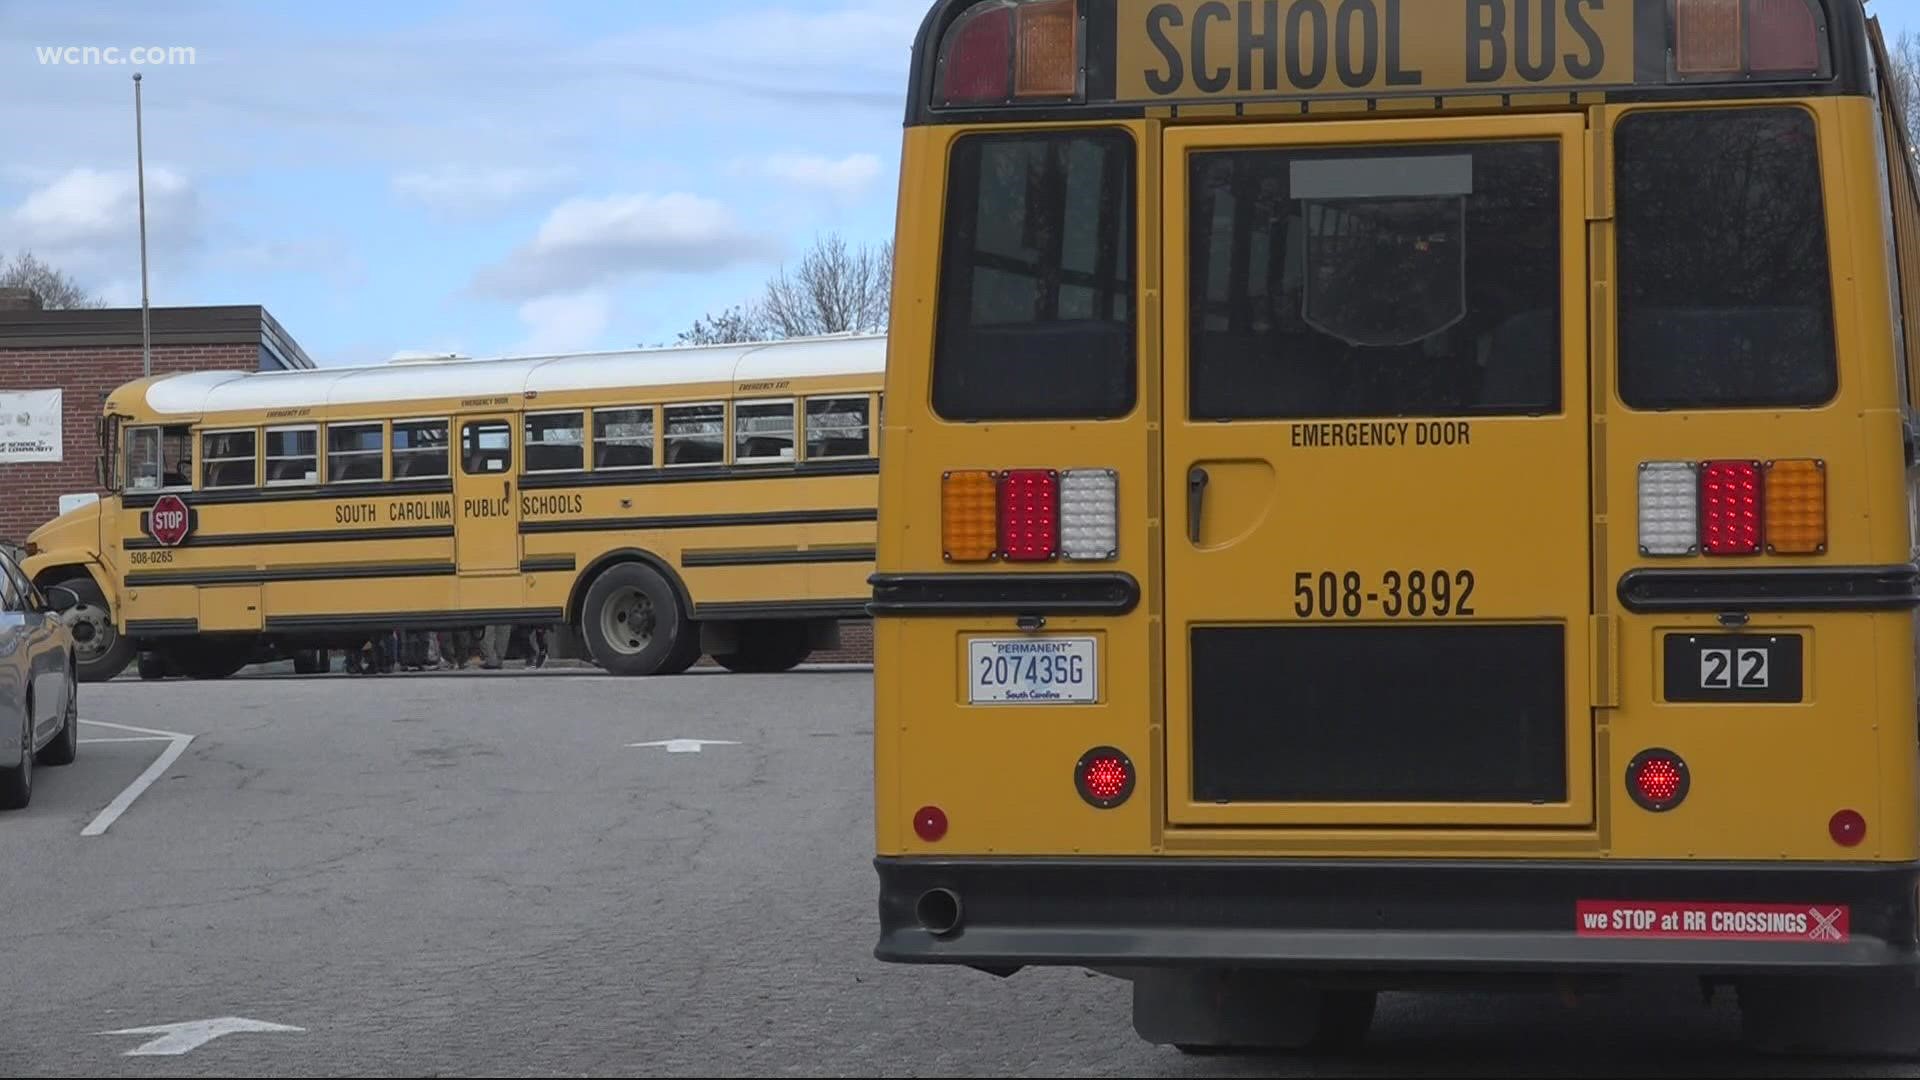 One week into the new school year, CMS is still plagued by bus woes.